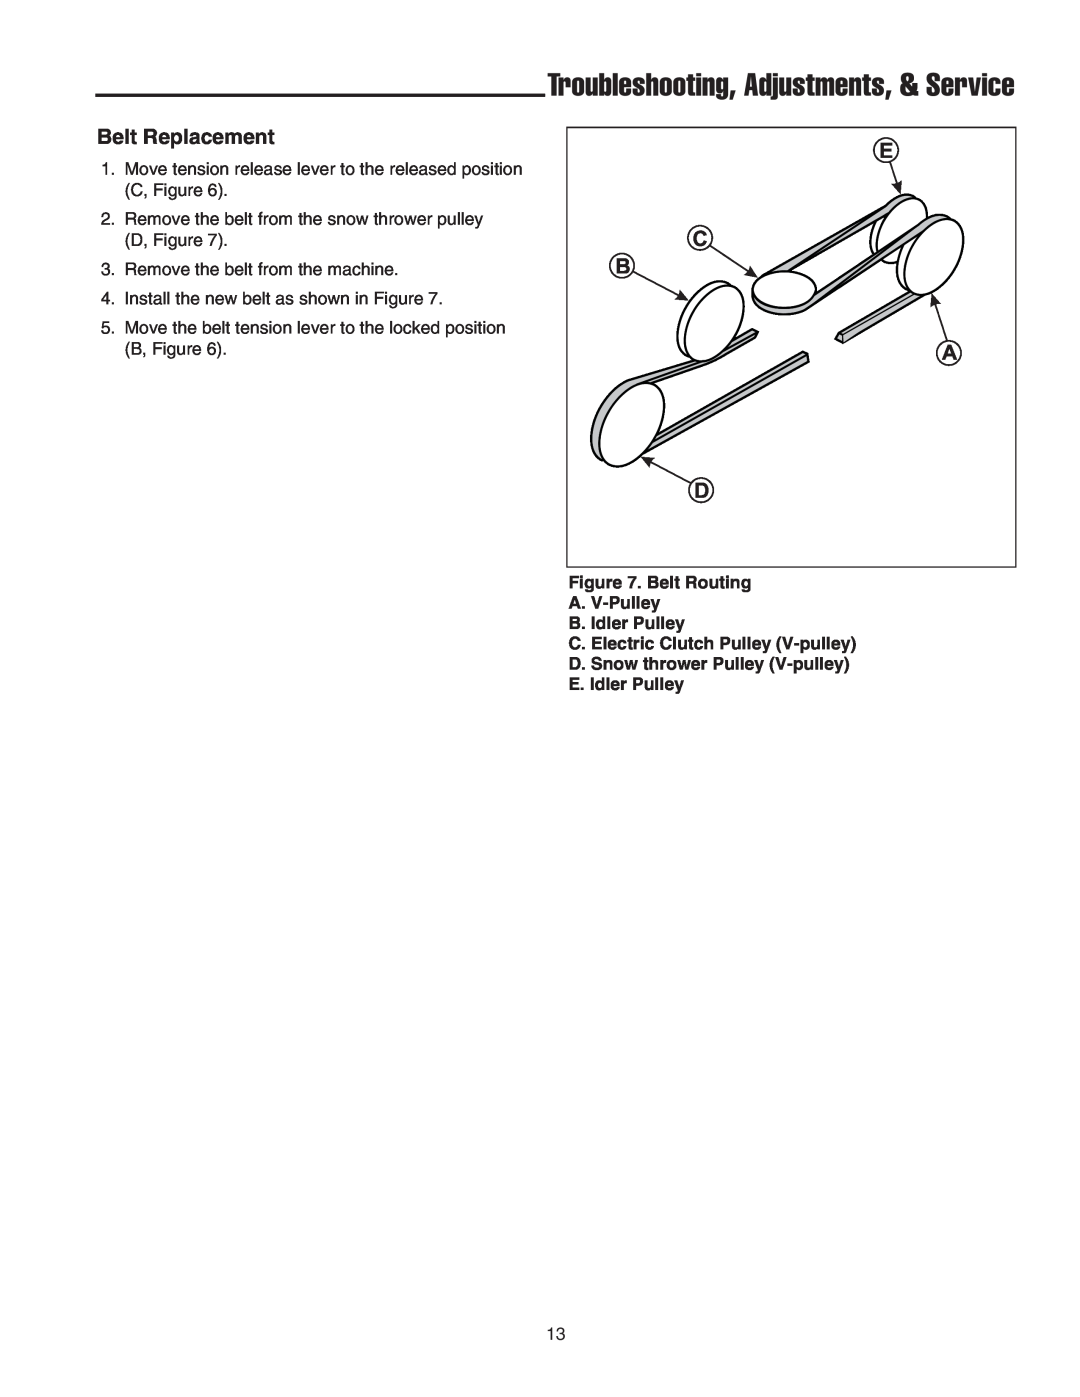 Snapper 42" Single-Stage Snowthrower manual Belt Replacement, Troubleshooting, Adjustments, & Service 